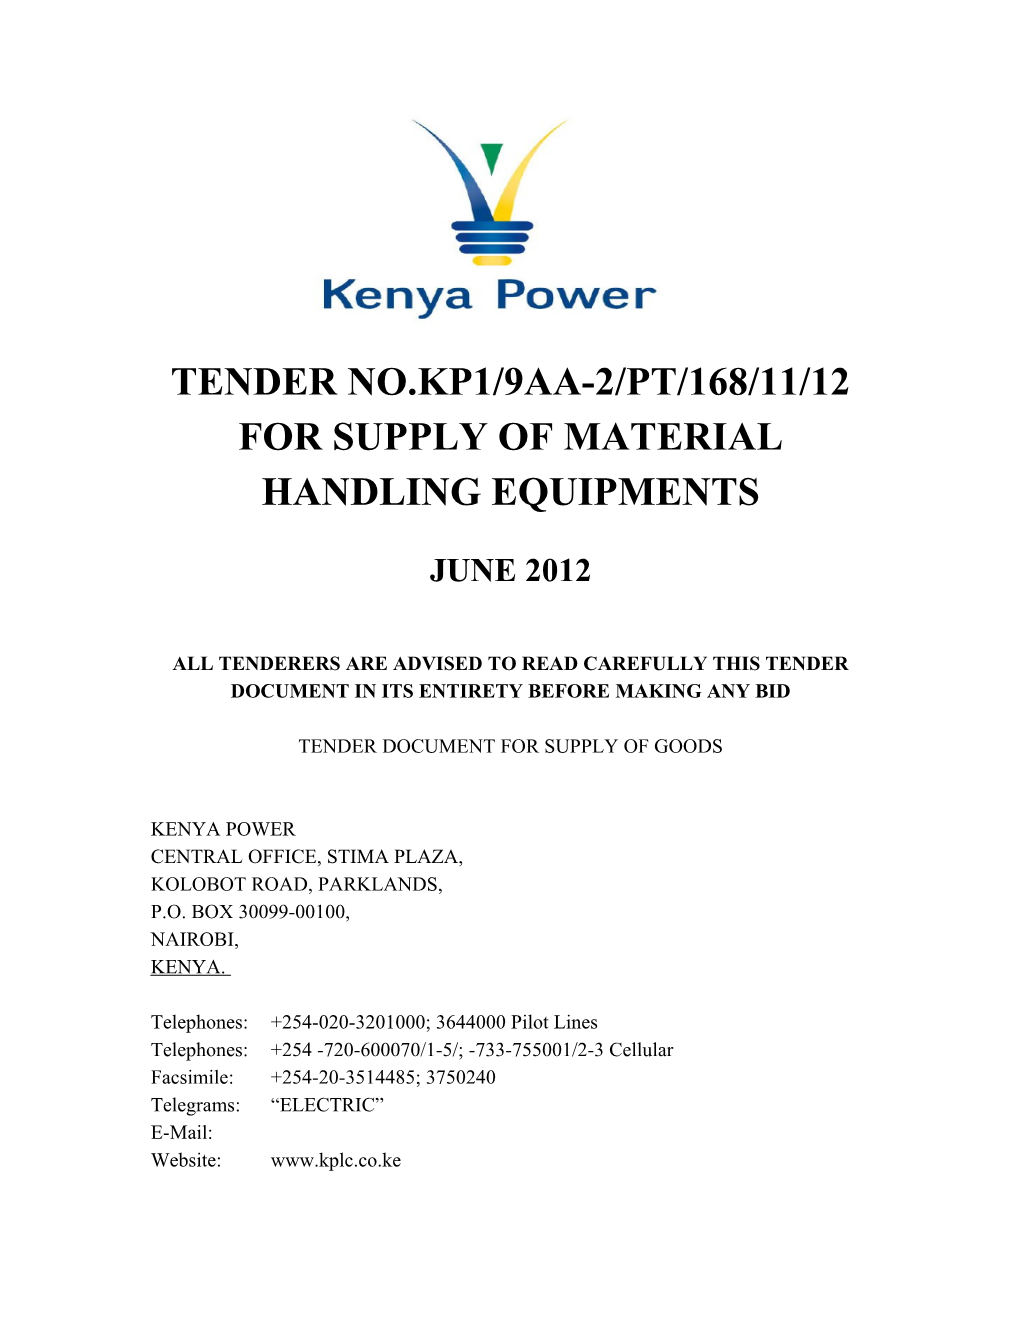 For Supply of Material Handling Equipments